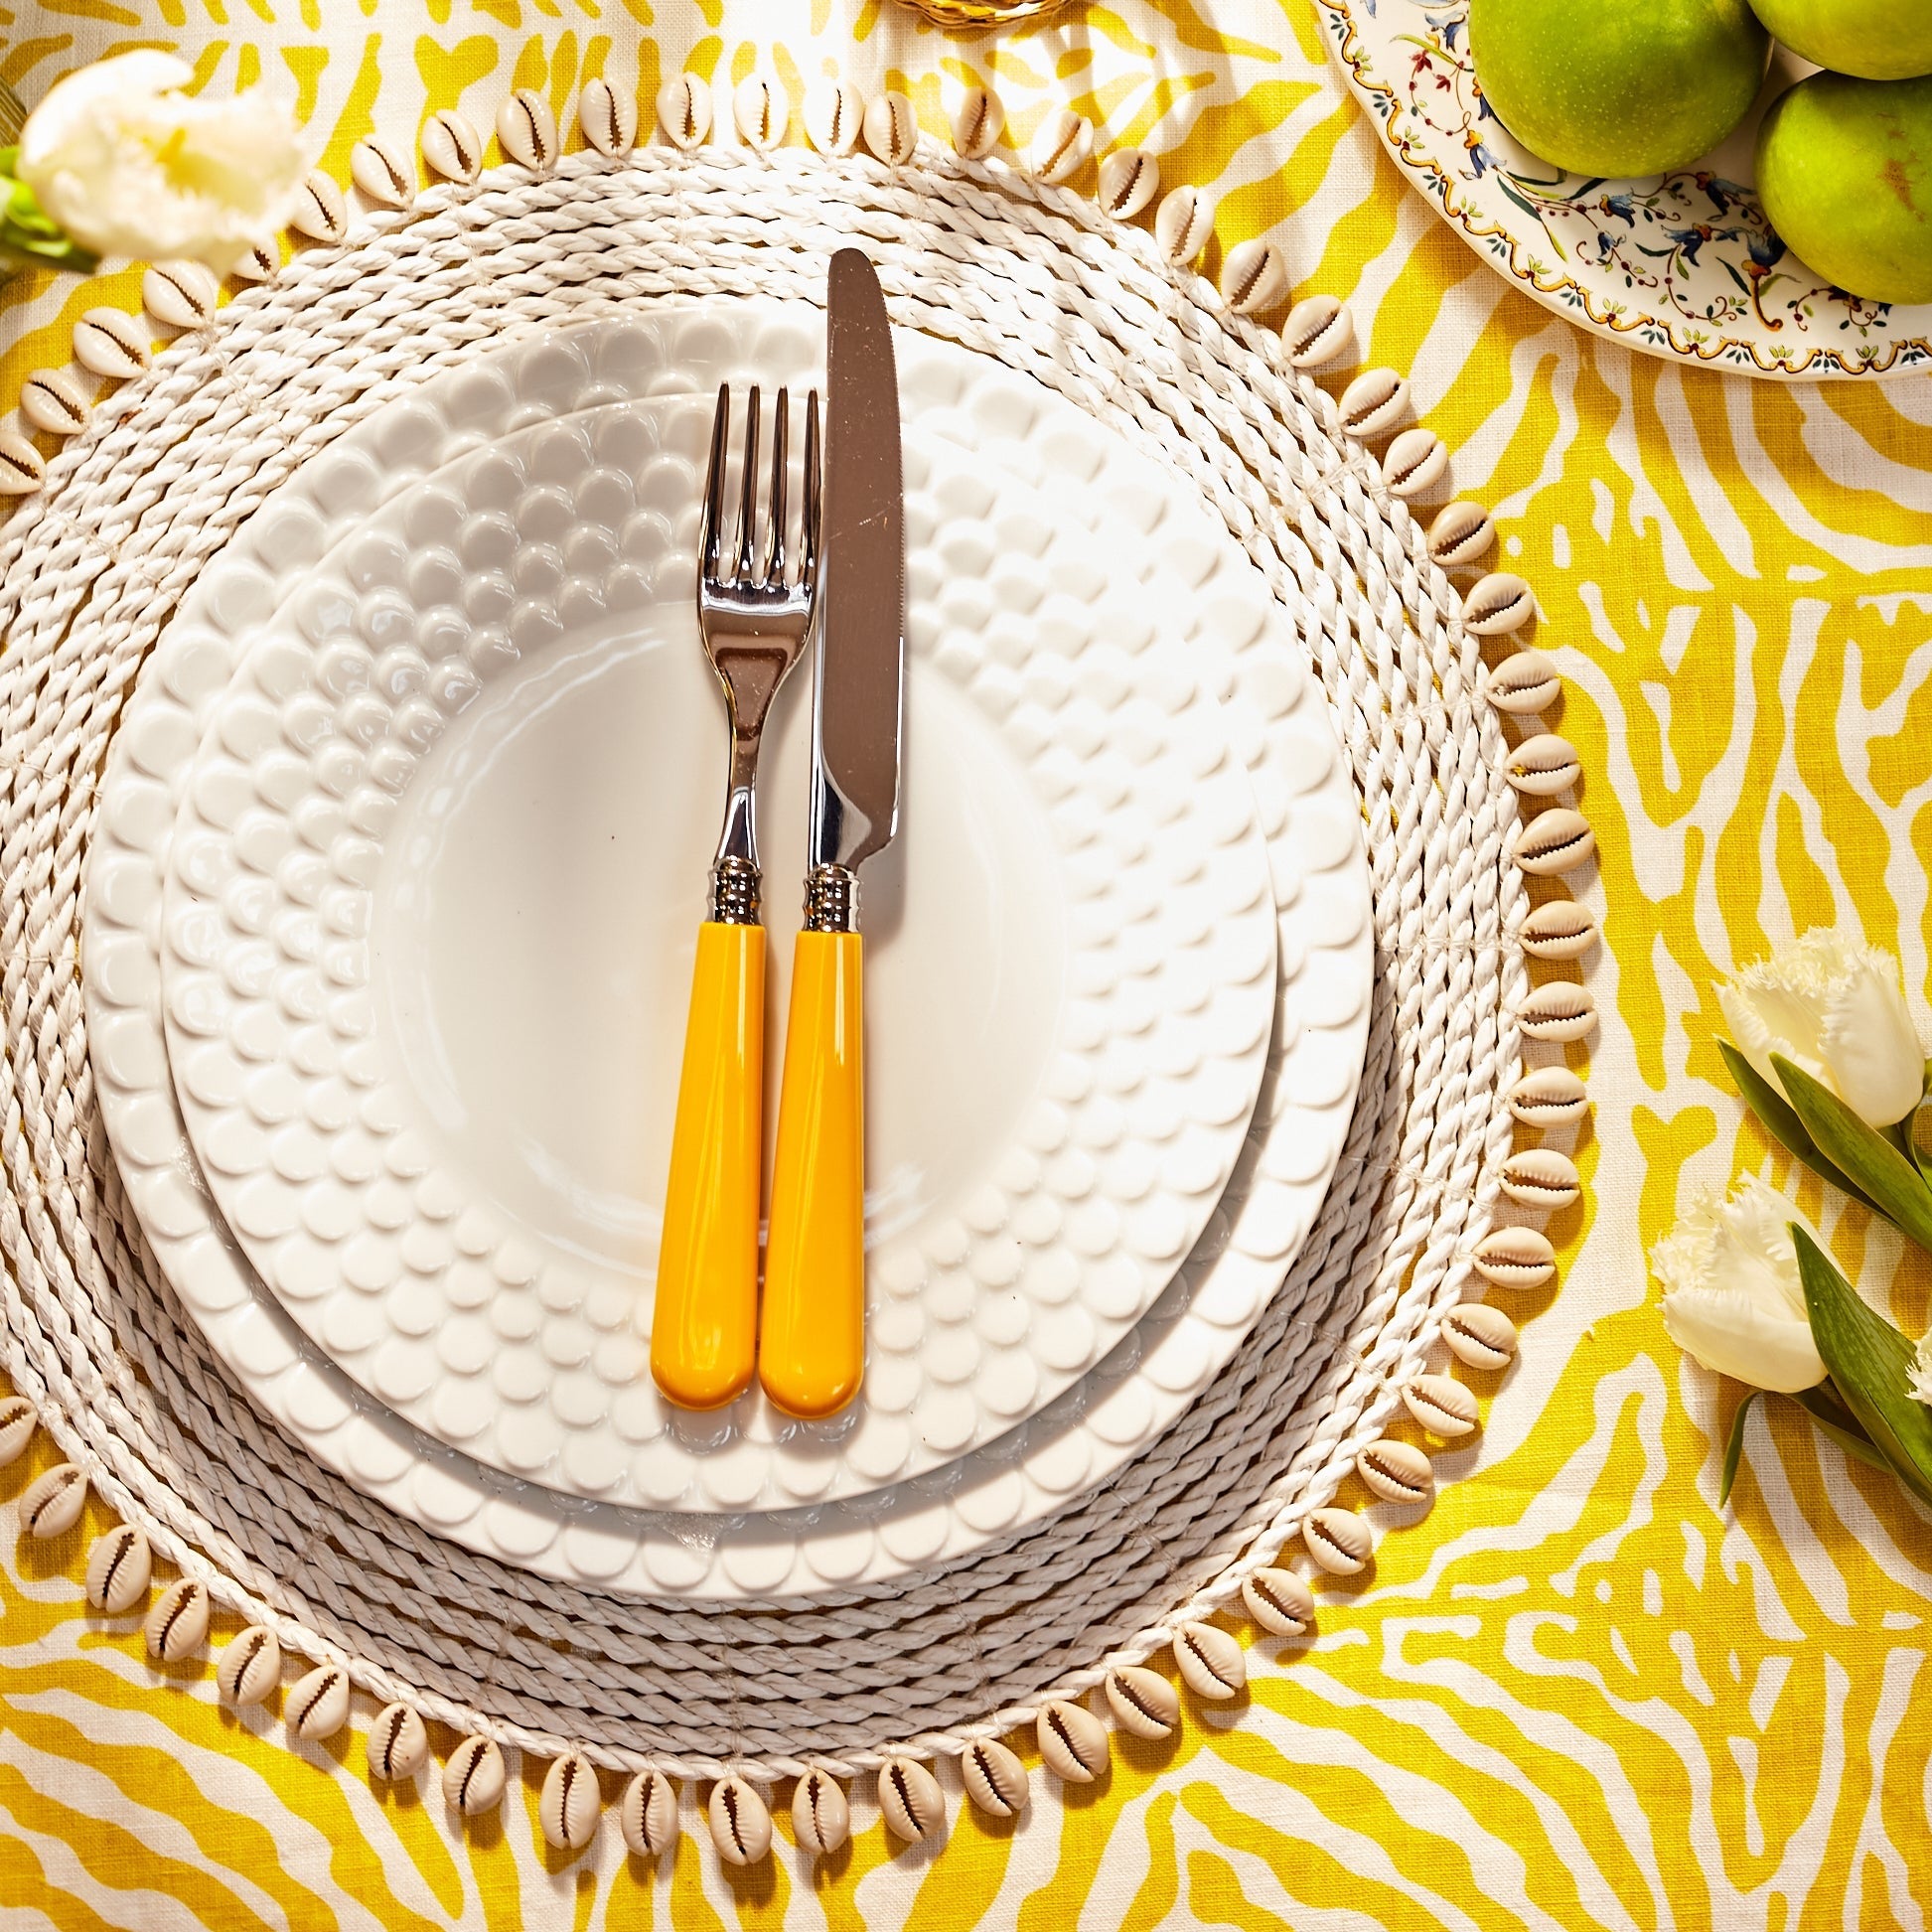 Rent: Rattan Shell White Placemat